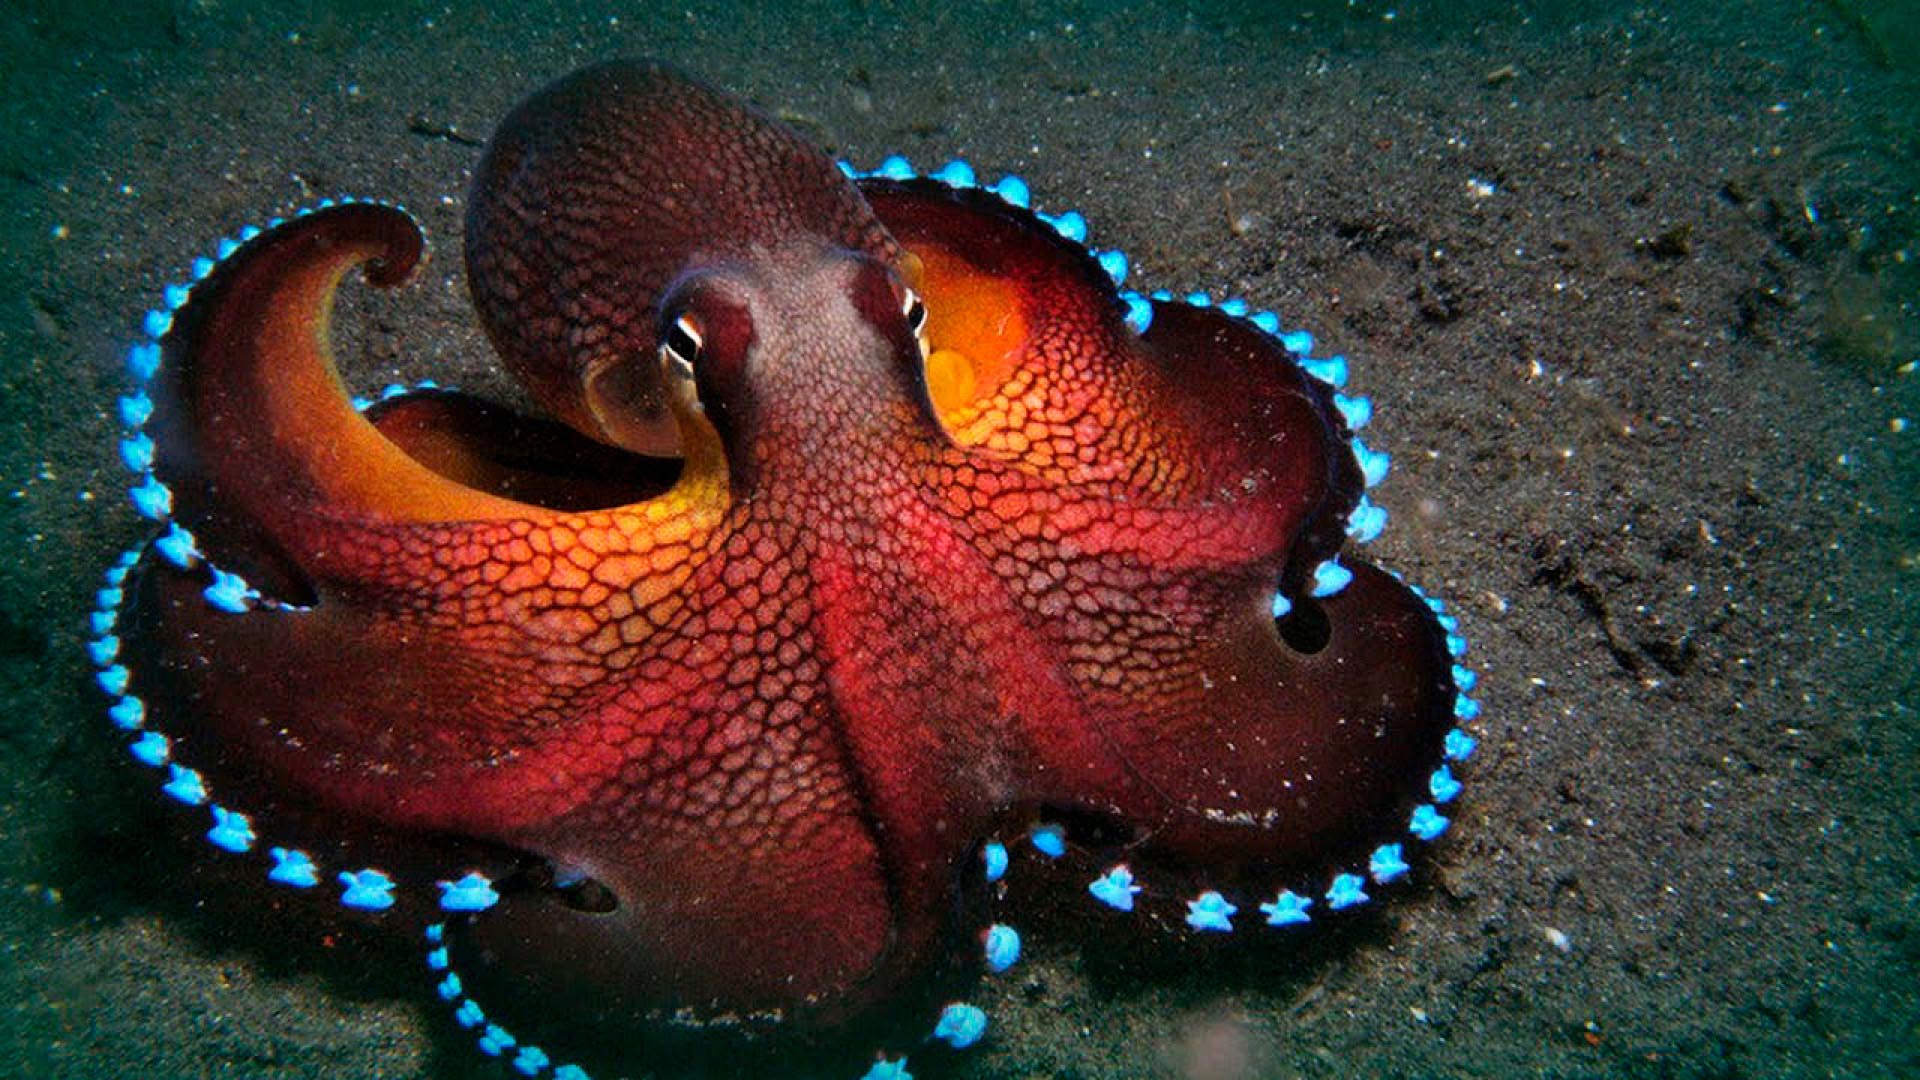 After decades of study, scientists determined that mating somehow pushes a molecular button on "self destruction" inside sea creatures.